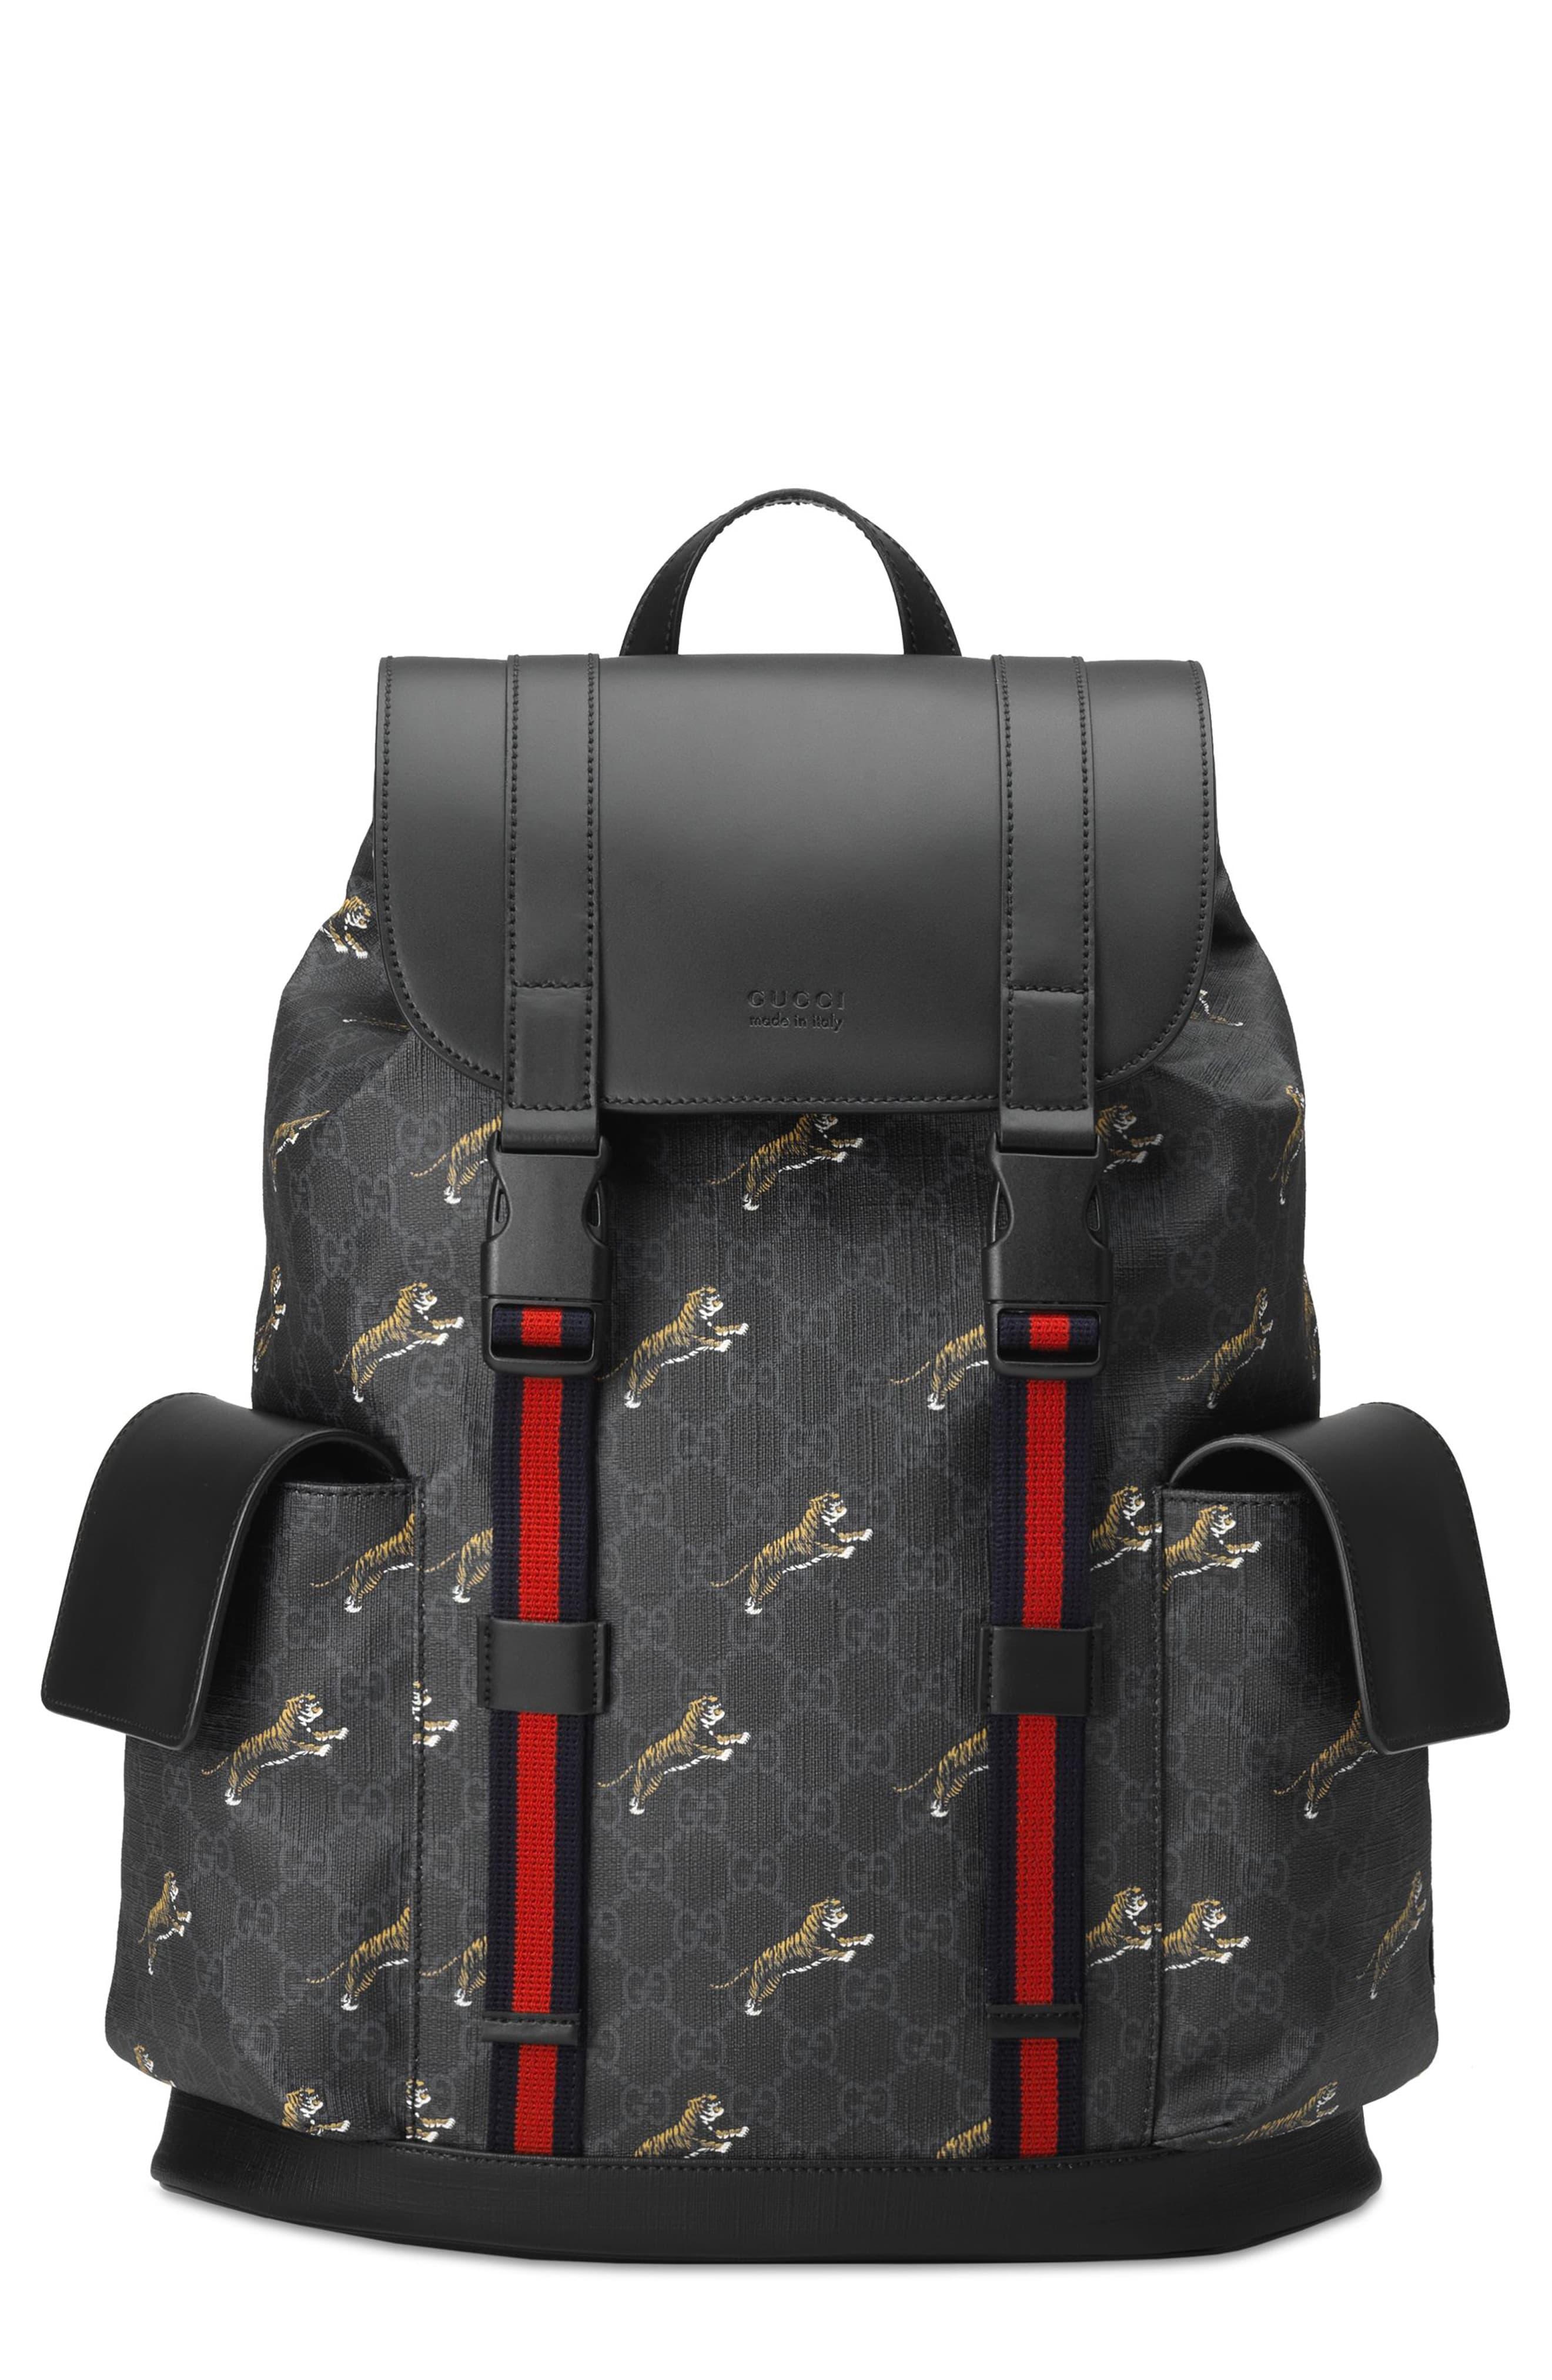 Gucci Bestiary Backpack With Tigers in Black for Men - Save 16% - Lyst